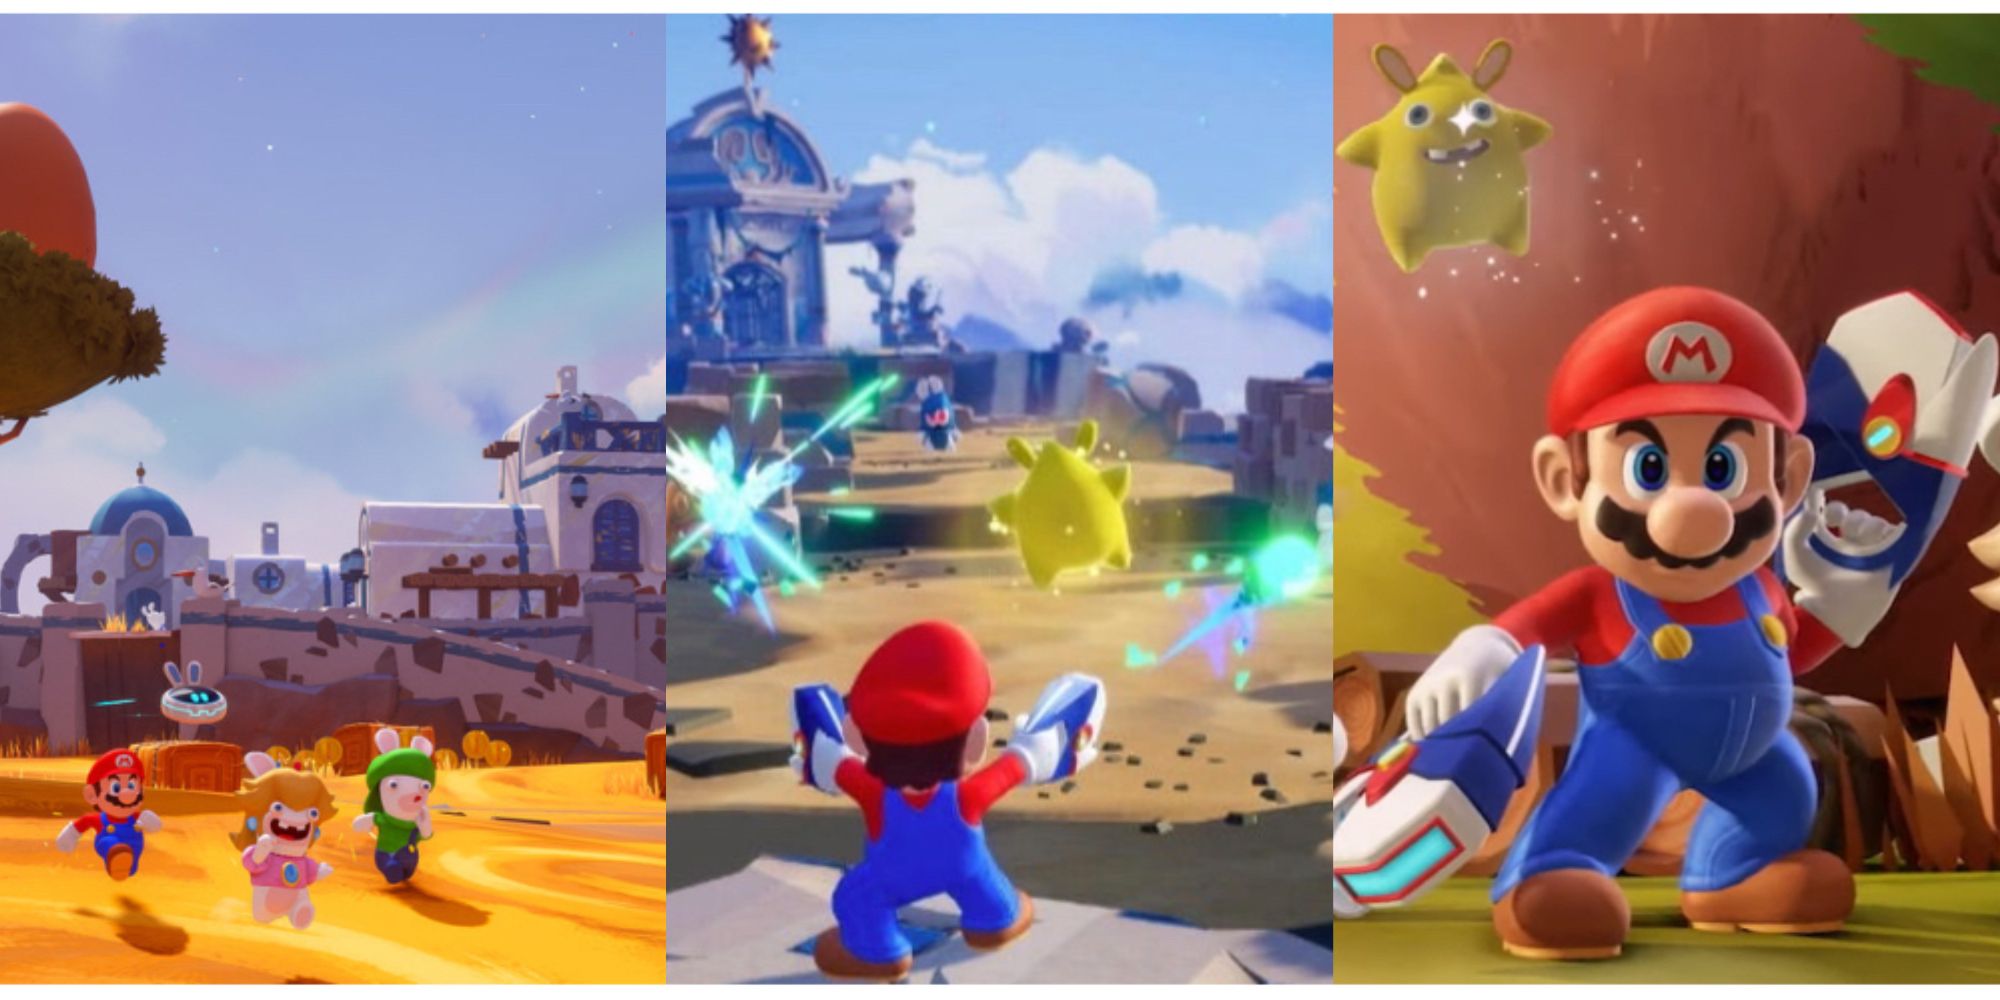 split image of Mario with Rabbid Peach and Rabbid Luigi, Mario firing his weapons, and Mario in his battle pose in Mario + Rabbids: Sparks of Hope